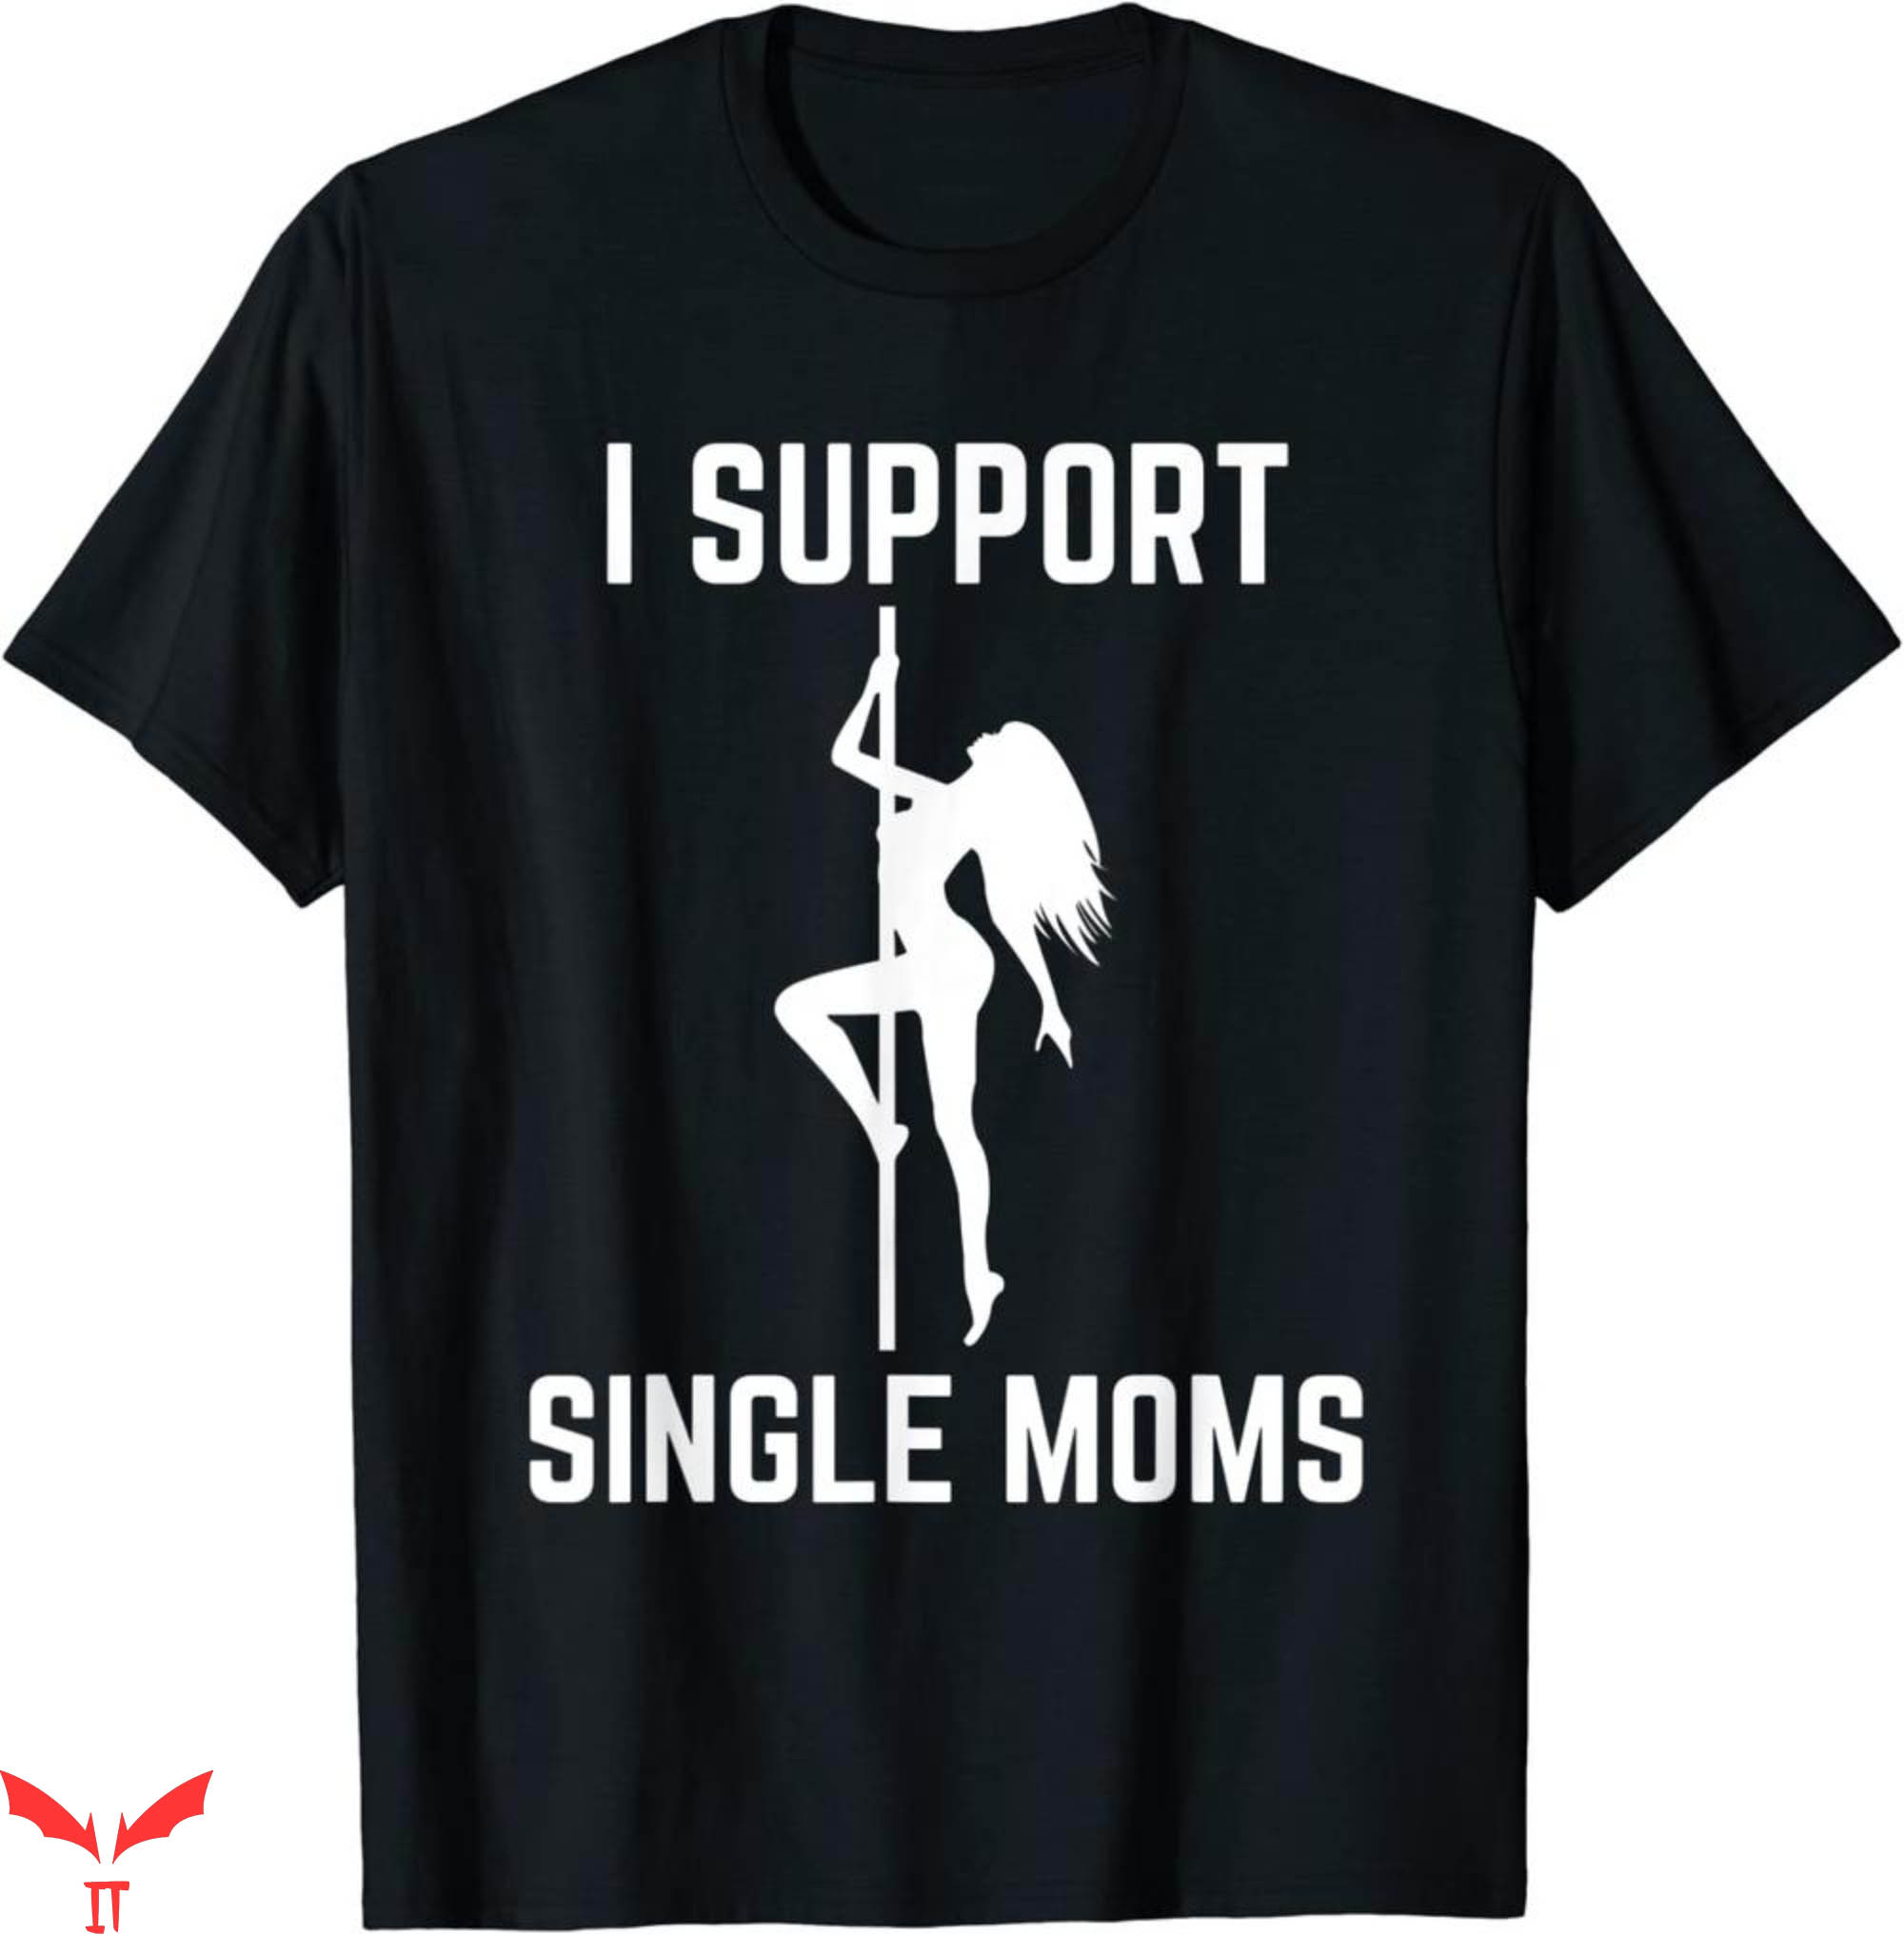 Womens Offensive T-Shirt I Support Single Moms Rude Party